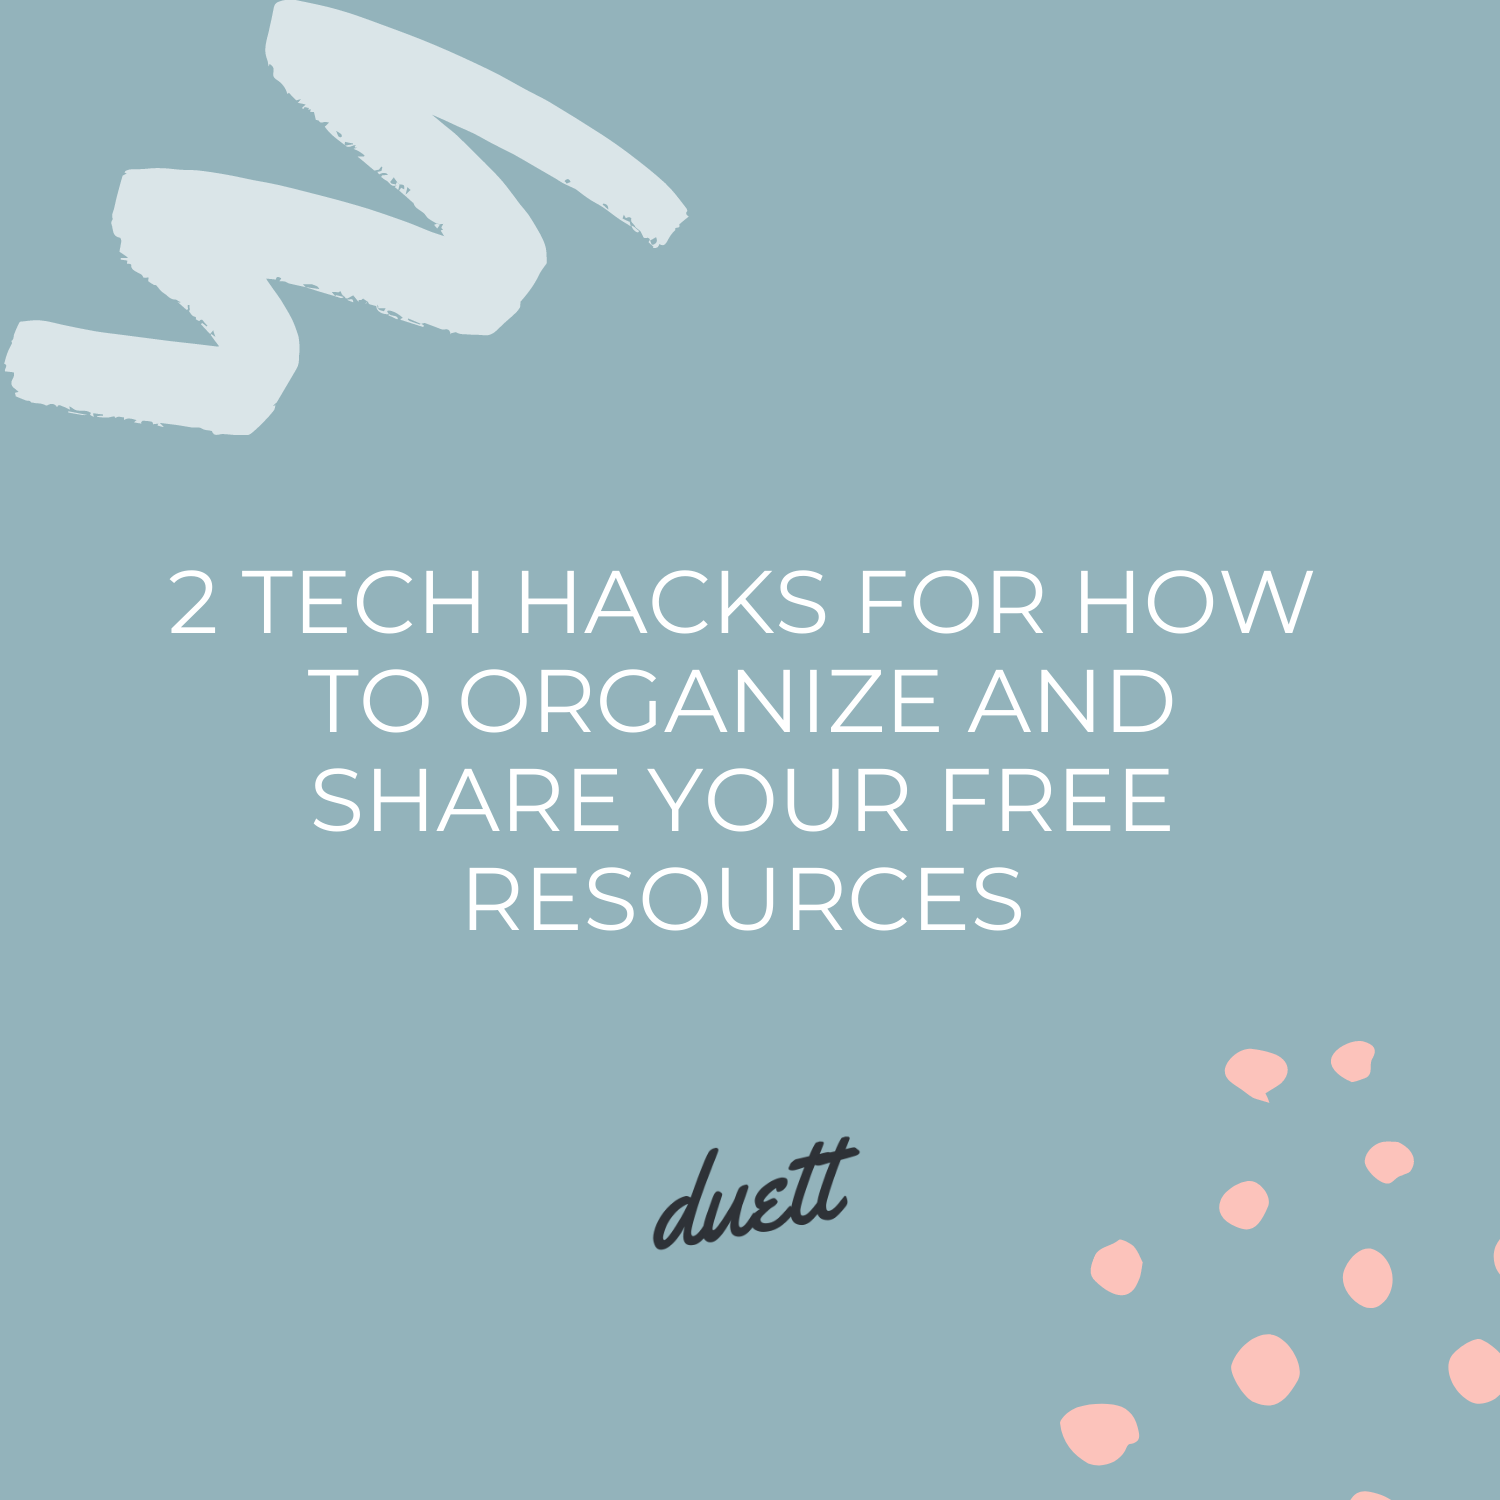 2 Tech Hacks for How to Organize and Share Your Free Resources